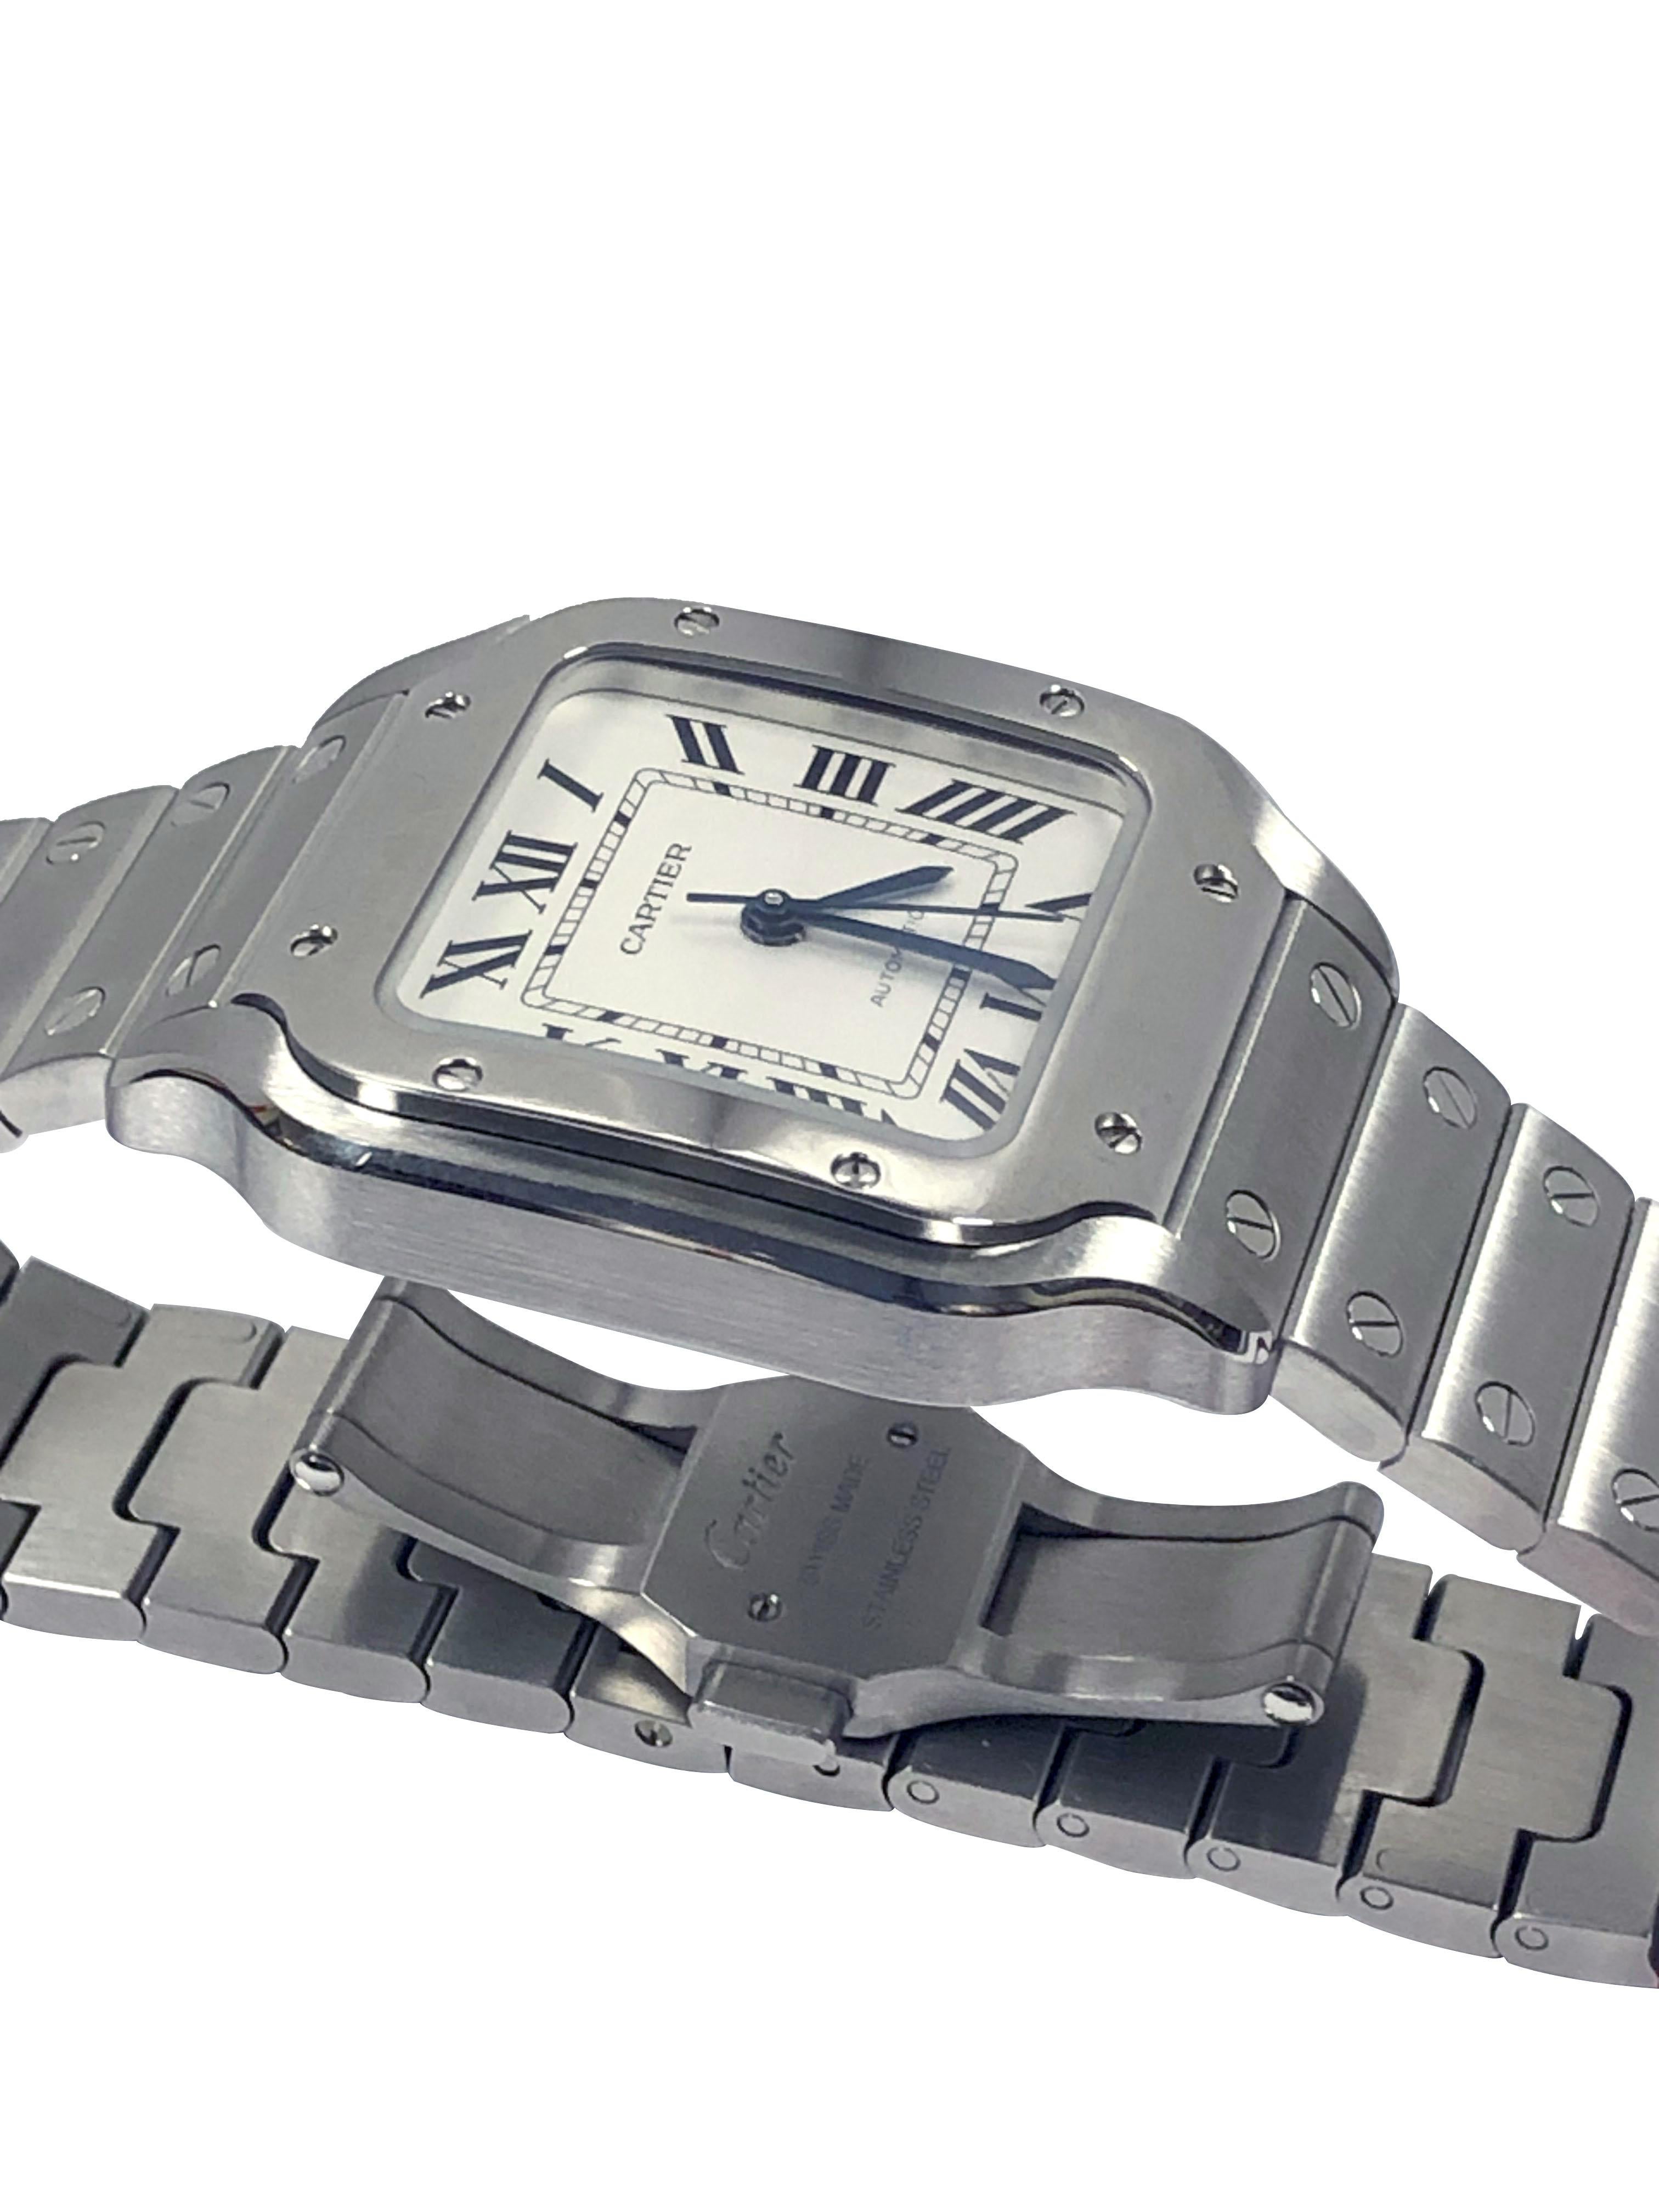 Circa 2021 Cartier Santos Wrist Watch, 32  X 34 M.M. Stainless Steel Water Resistant 3 piece case. Automatic, Self Winding movement, Silver Satin Dial with Black Roman Numerals, sweep seconds hand and a Sapphire set Crown.18 M.M. wide Steel Santos